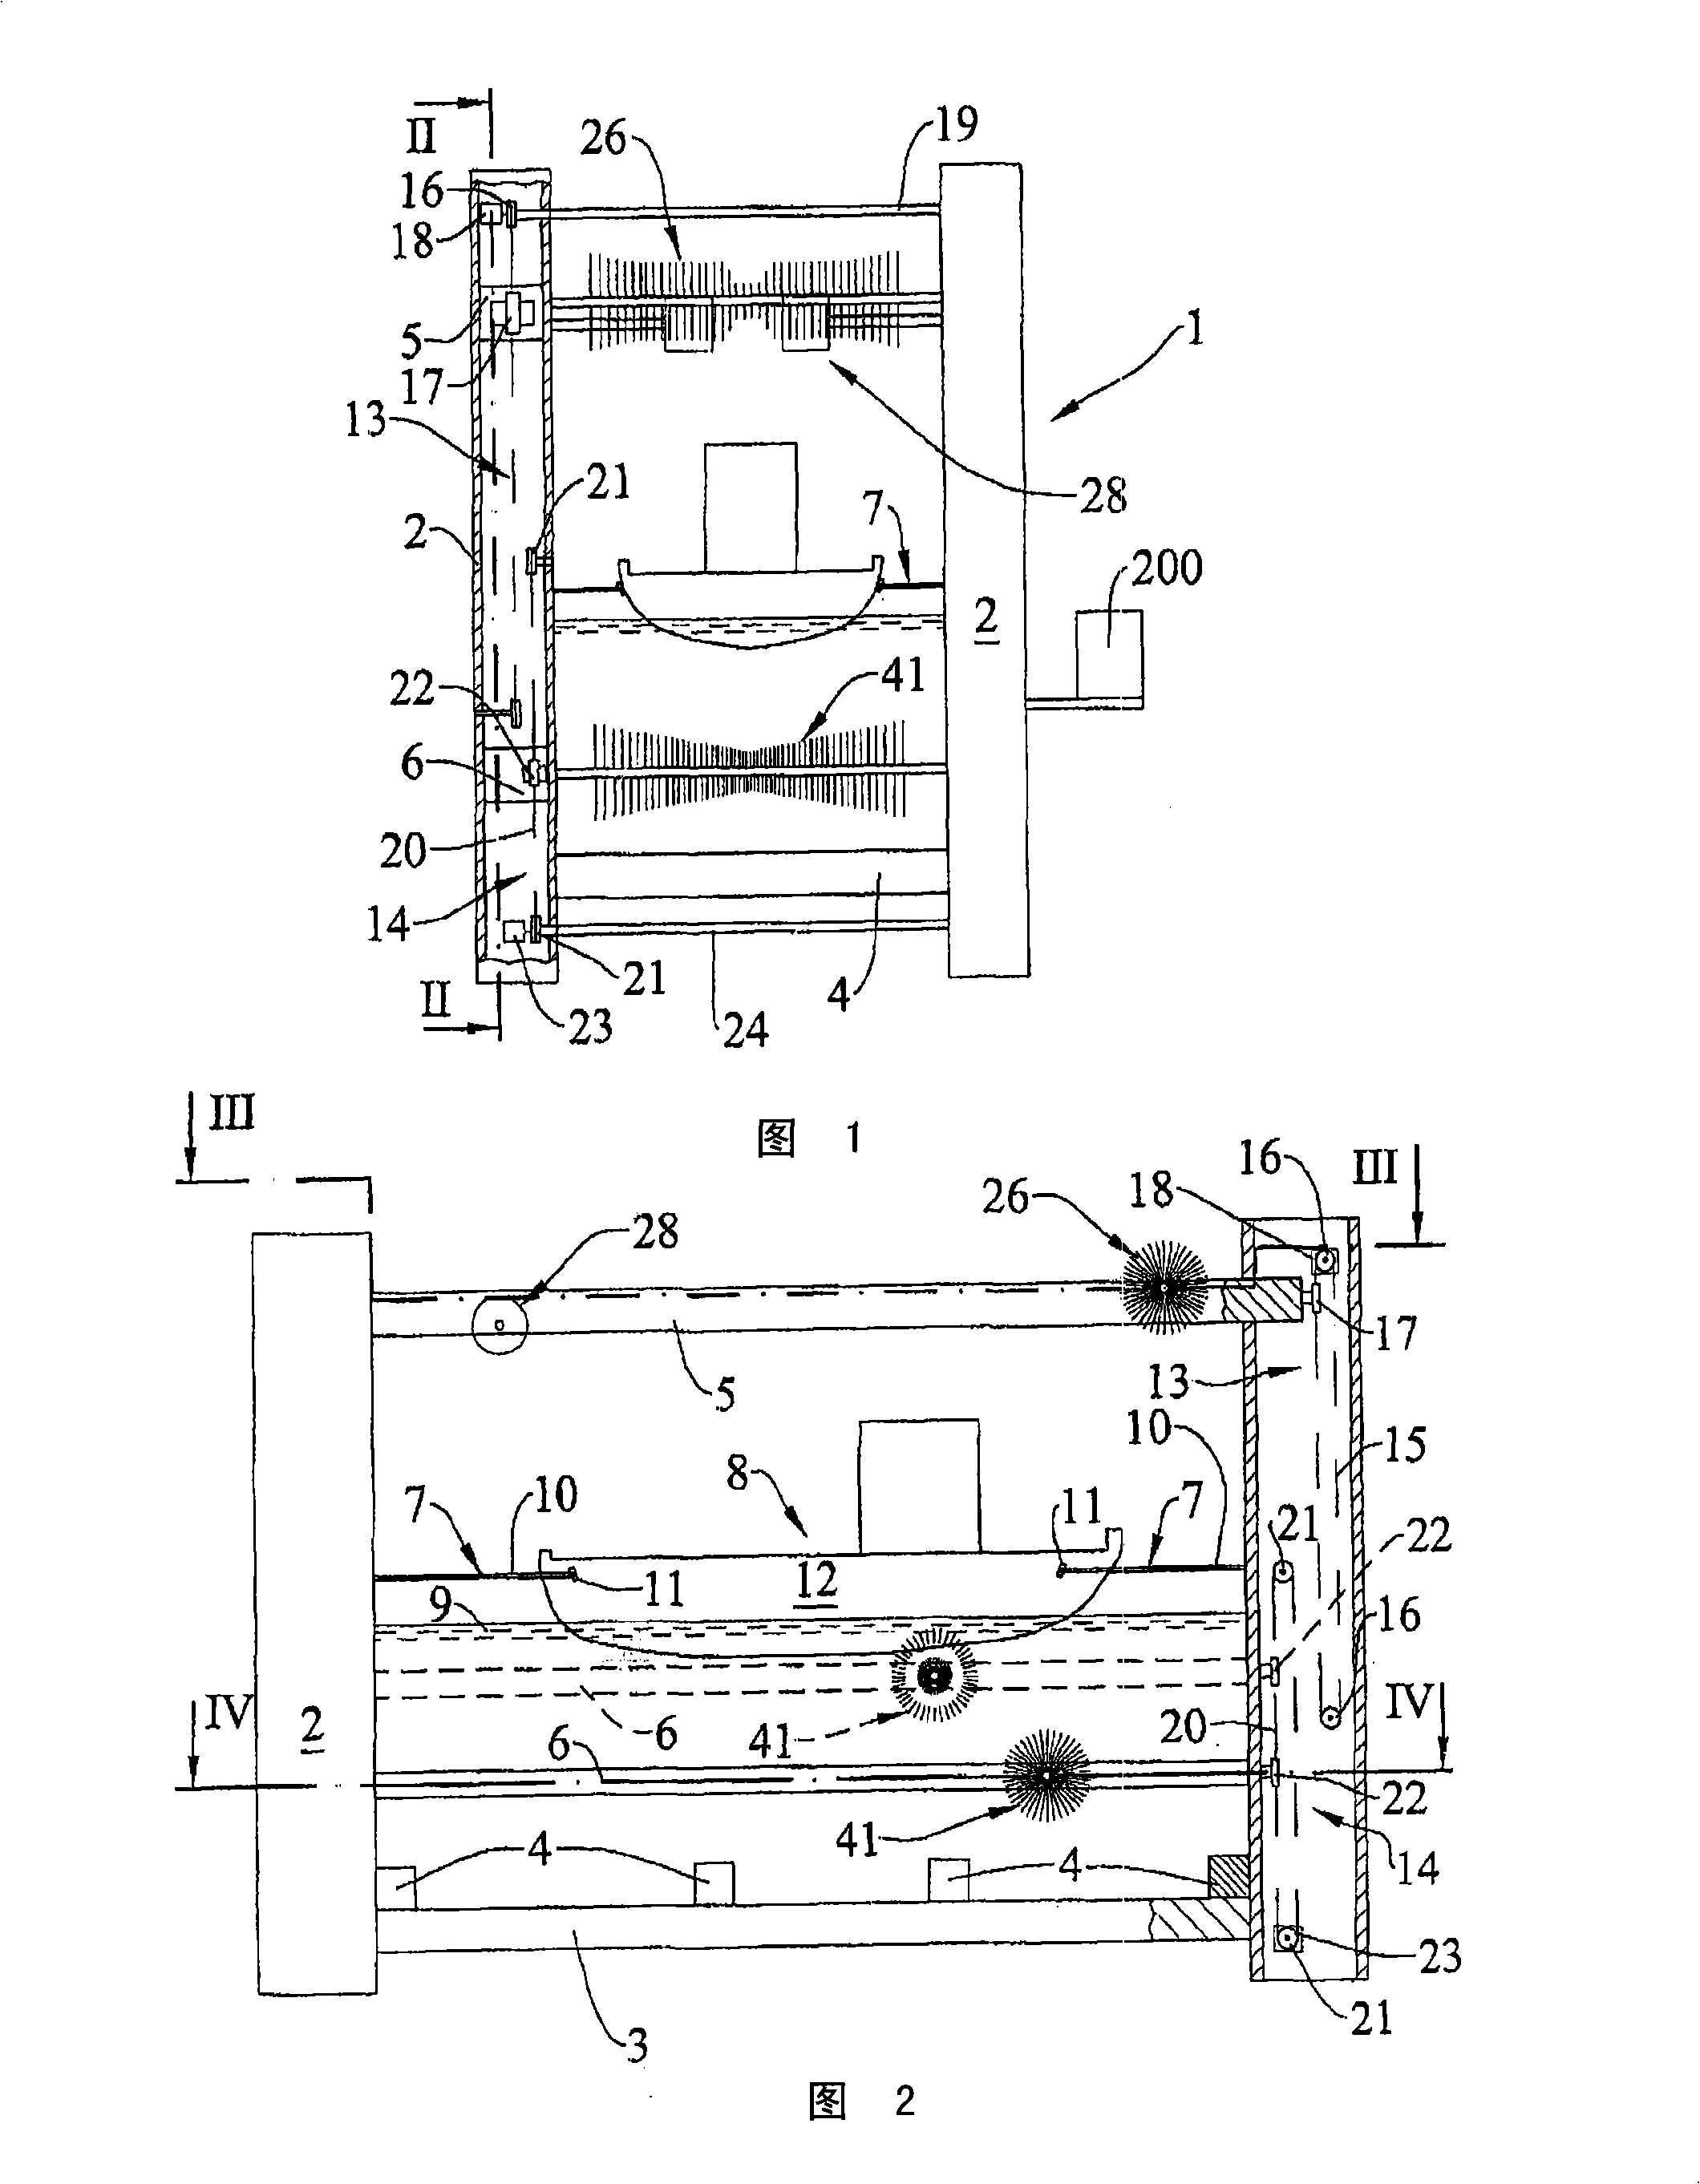 Marine plant for the automatic washing of boats, in particular for cleaning the hull